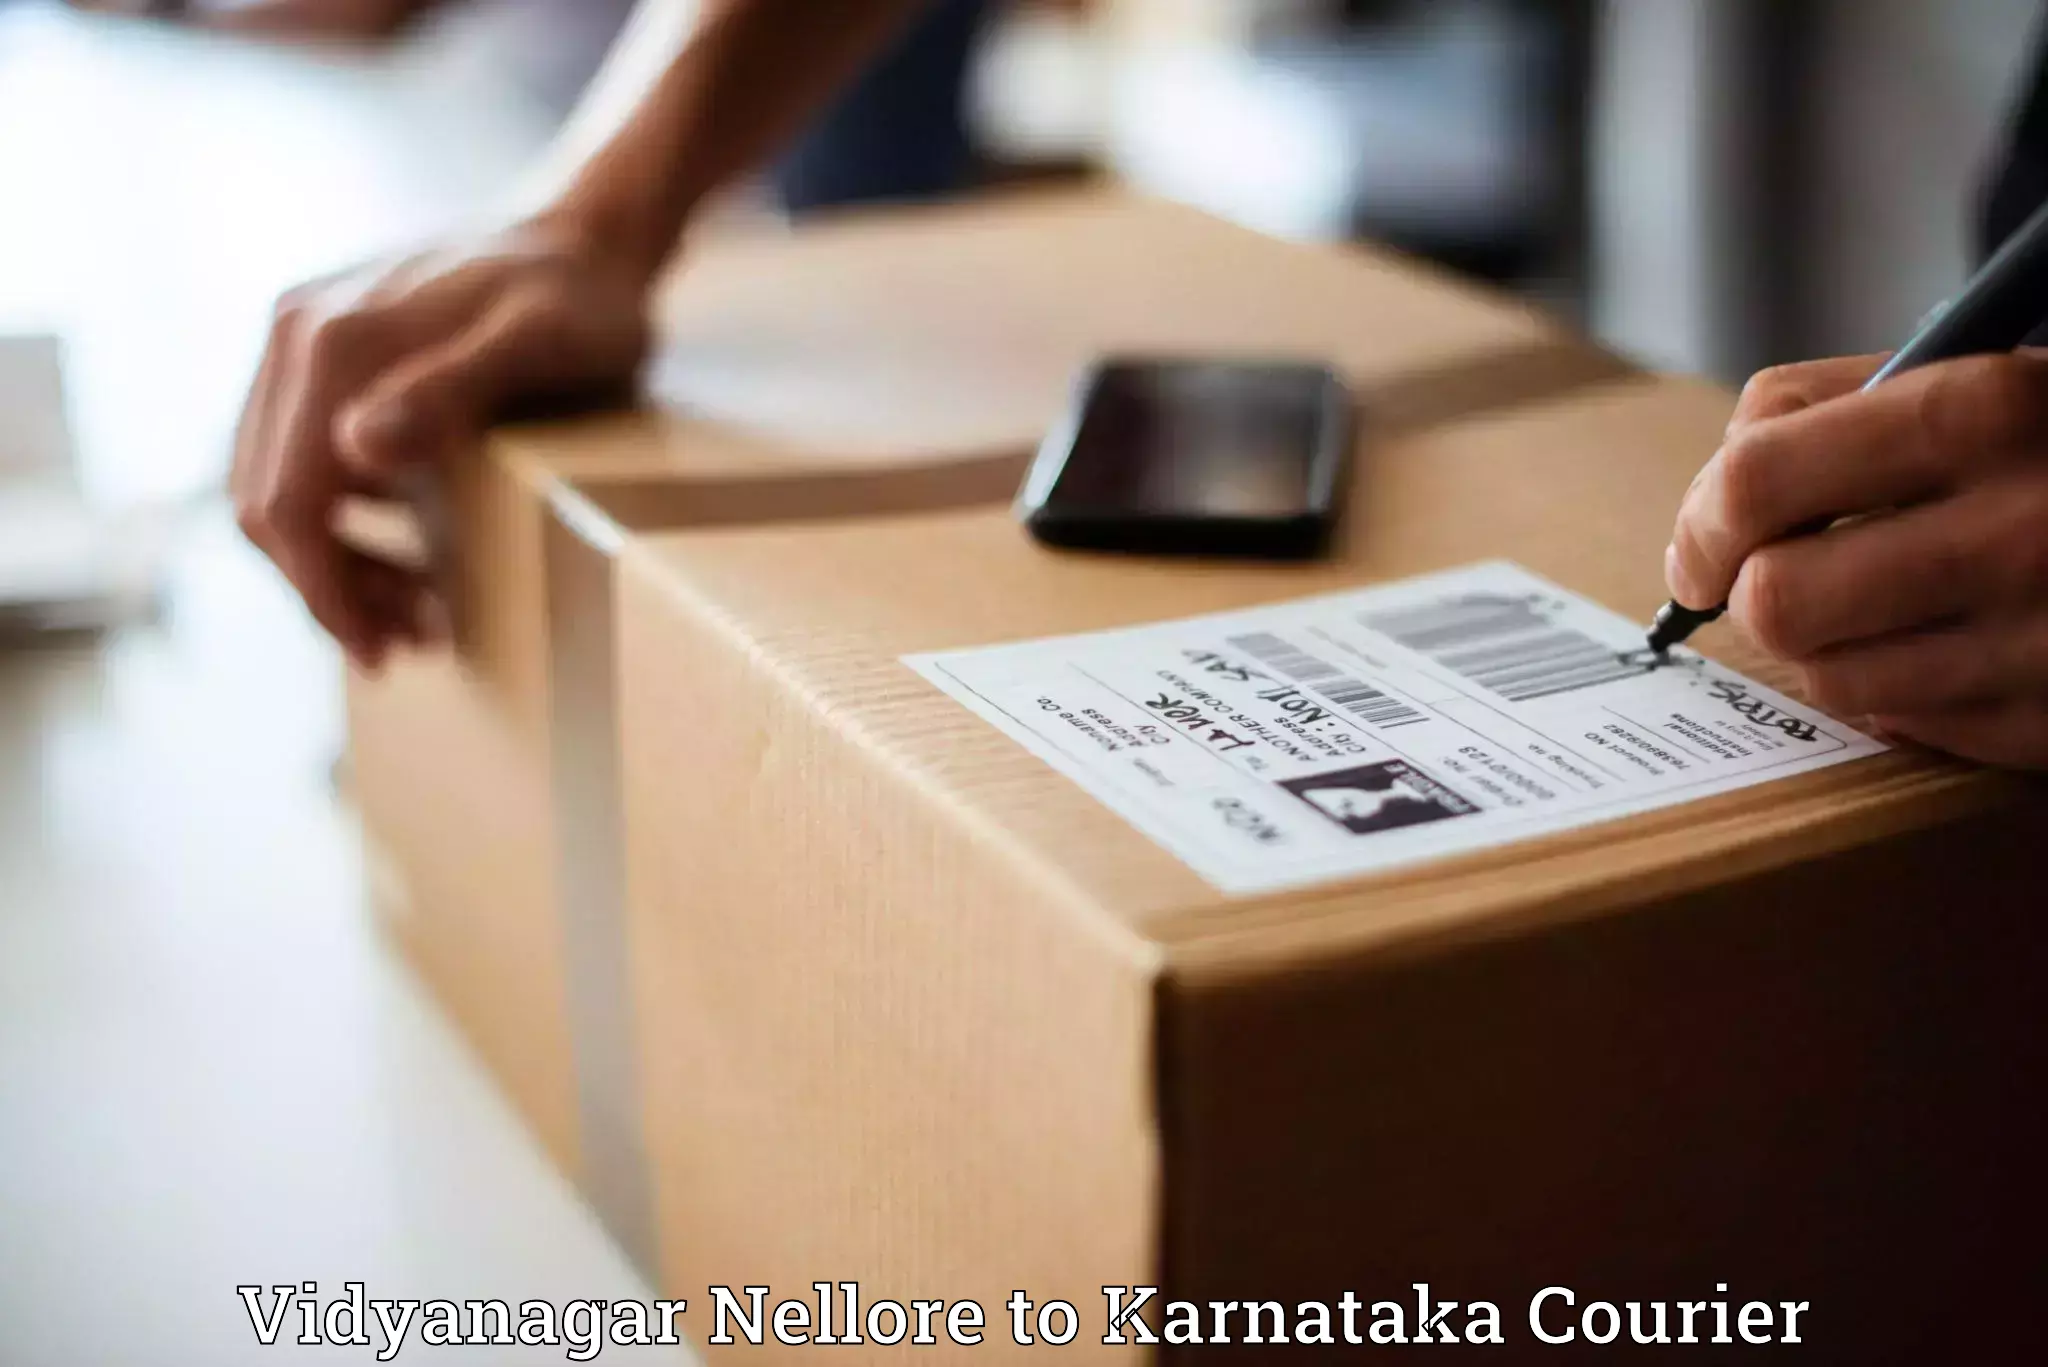 Large package courier Vidyanagar Nellore to Chikkamagalur